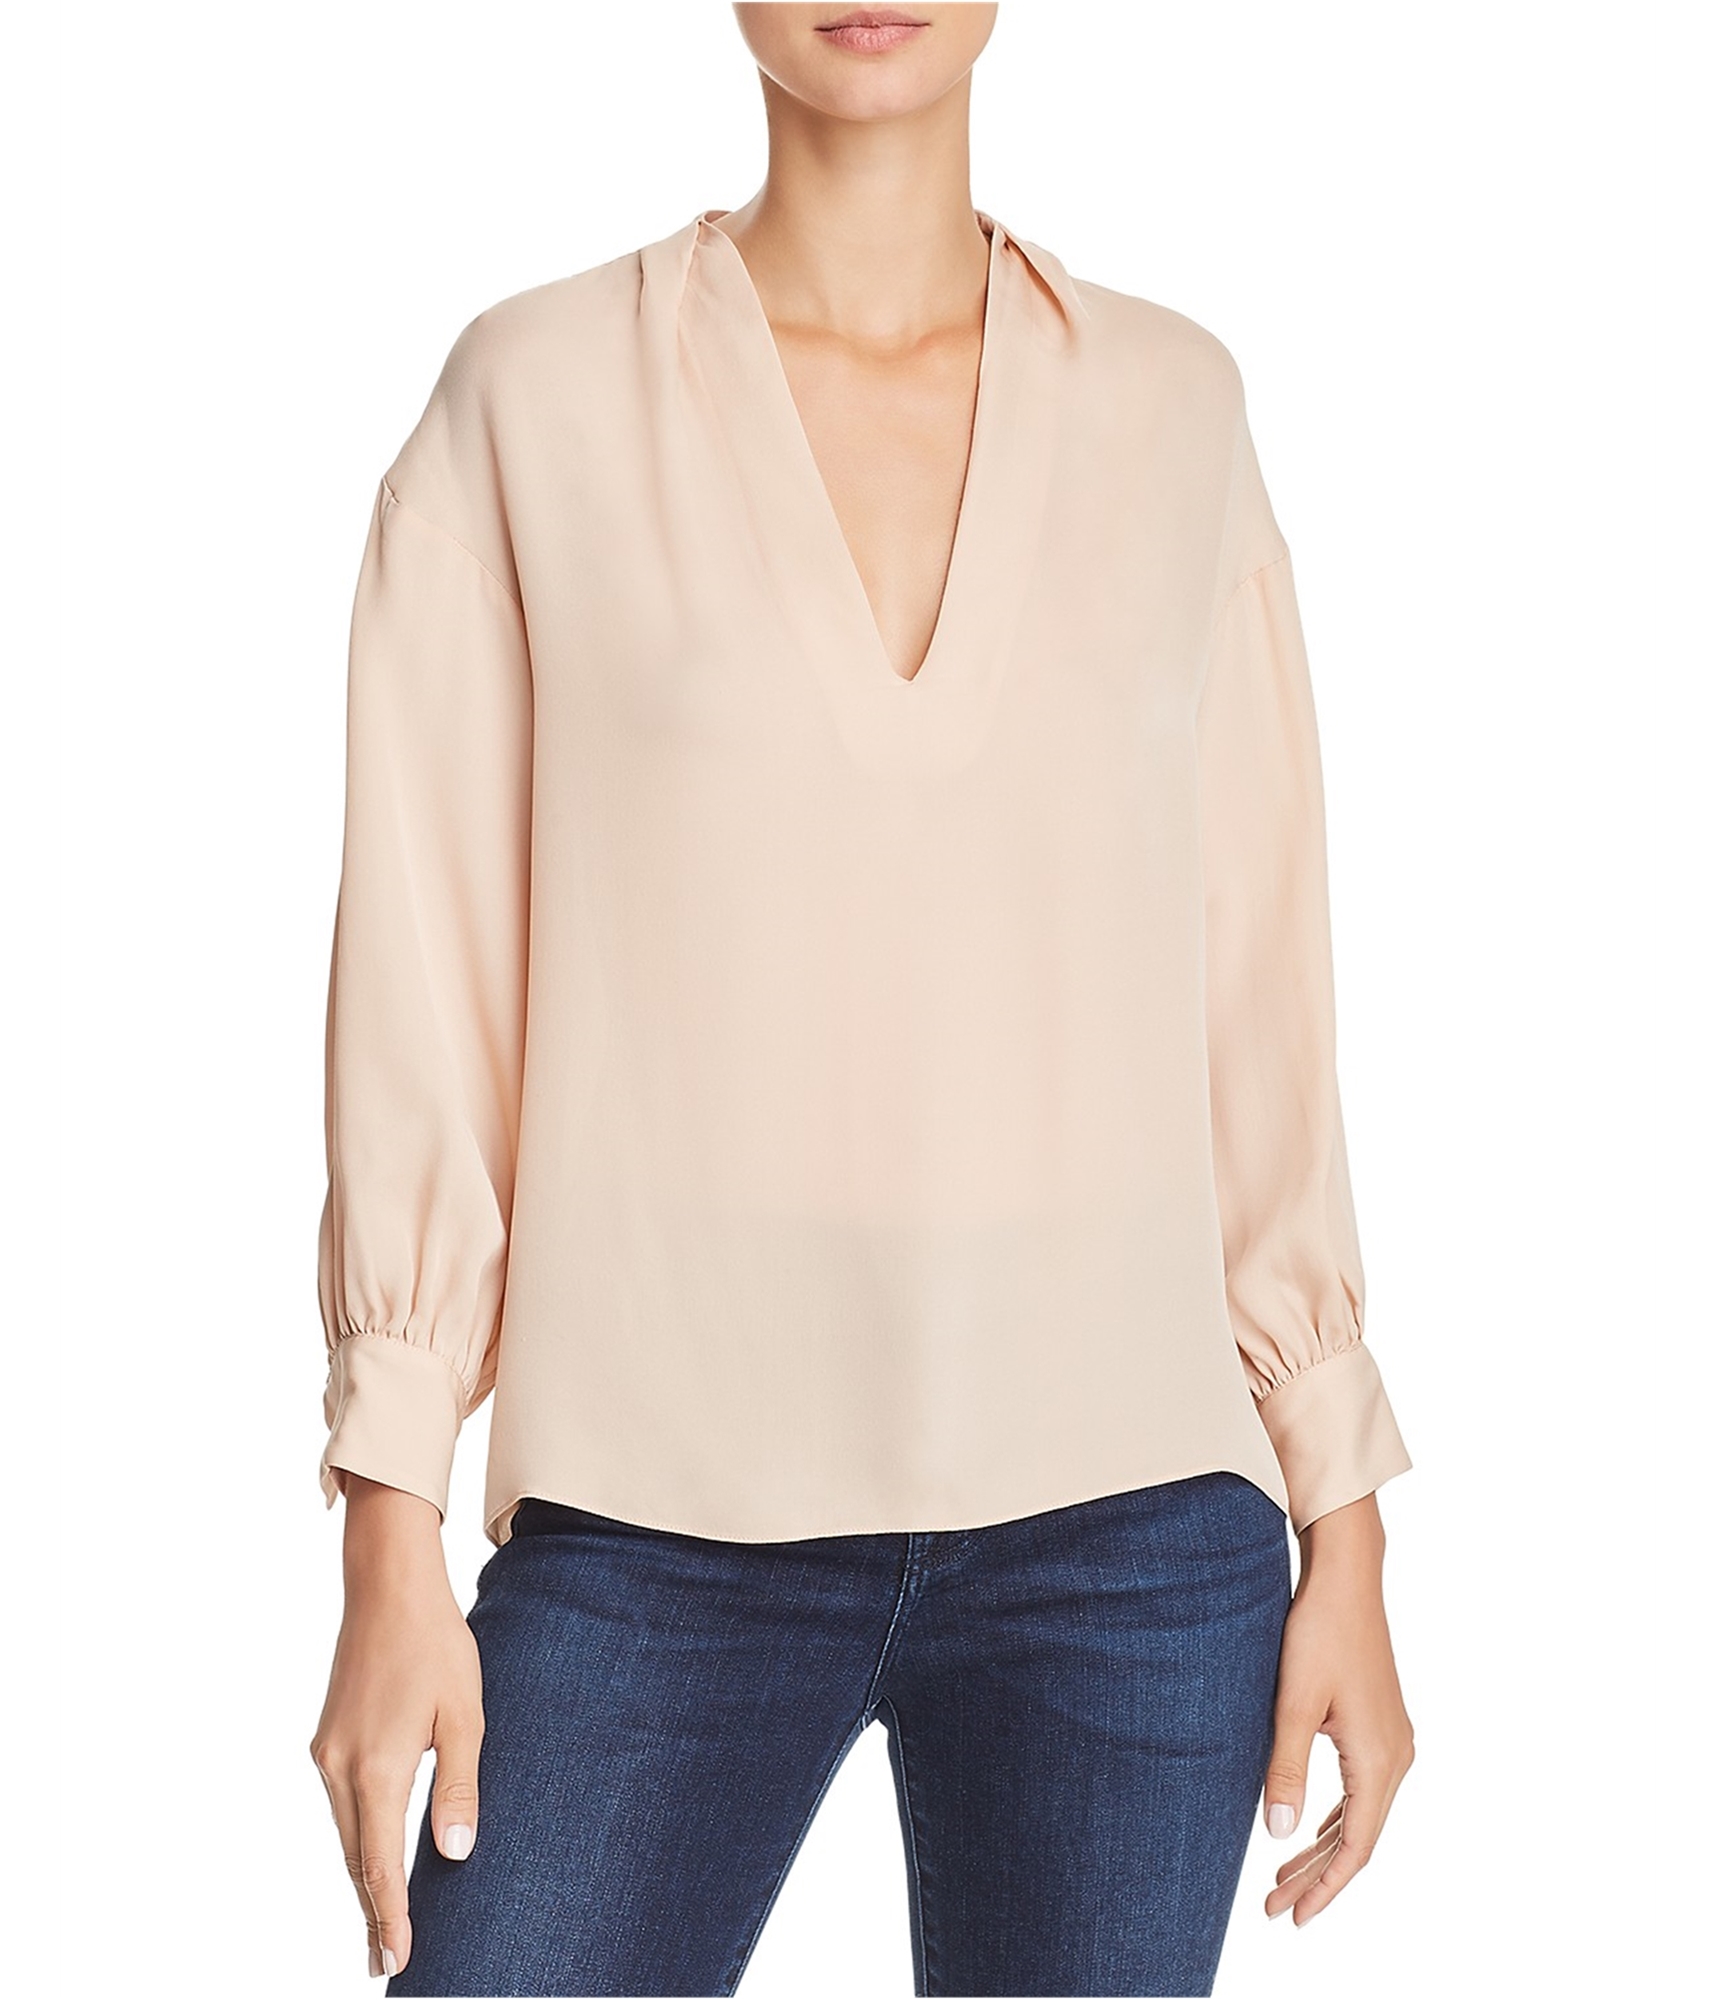 Joie Womens V-Neck Peasant Blouse, Pink, Small | eBay